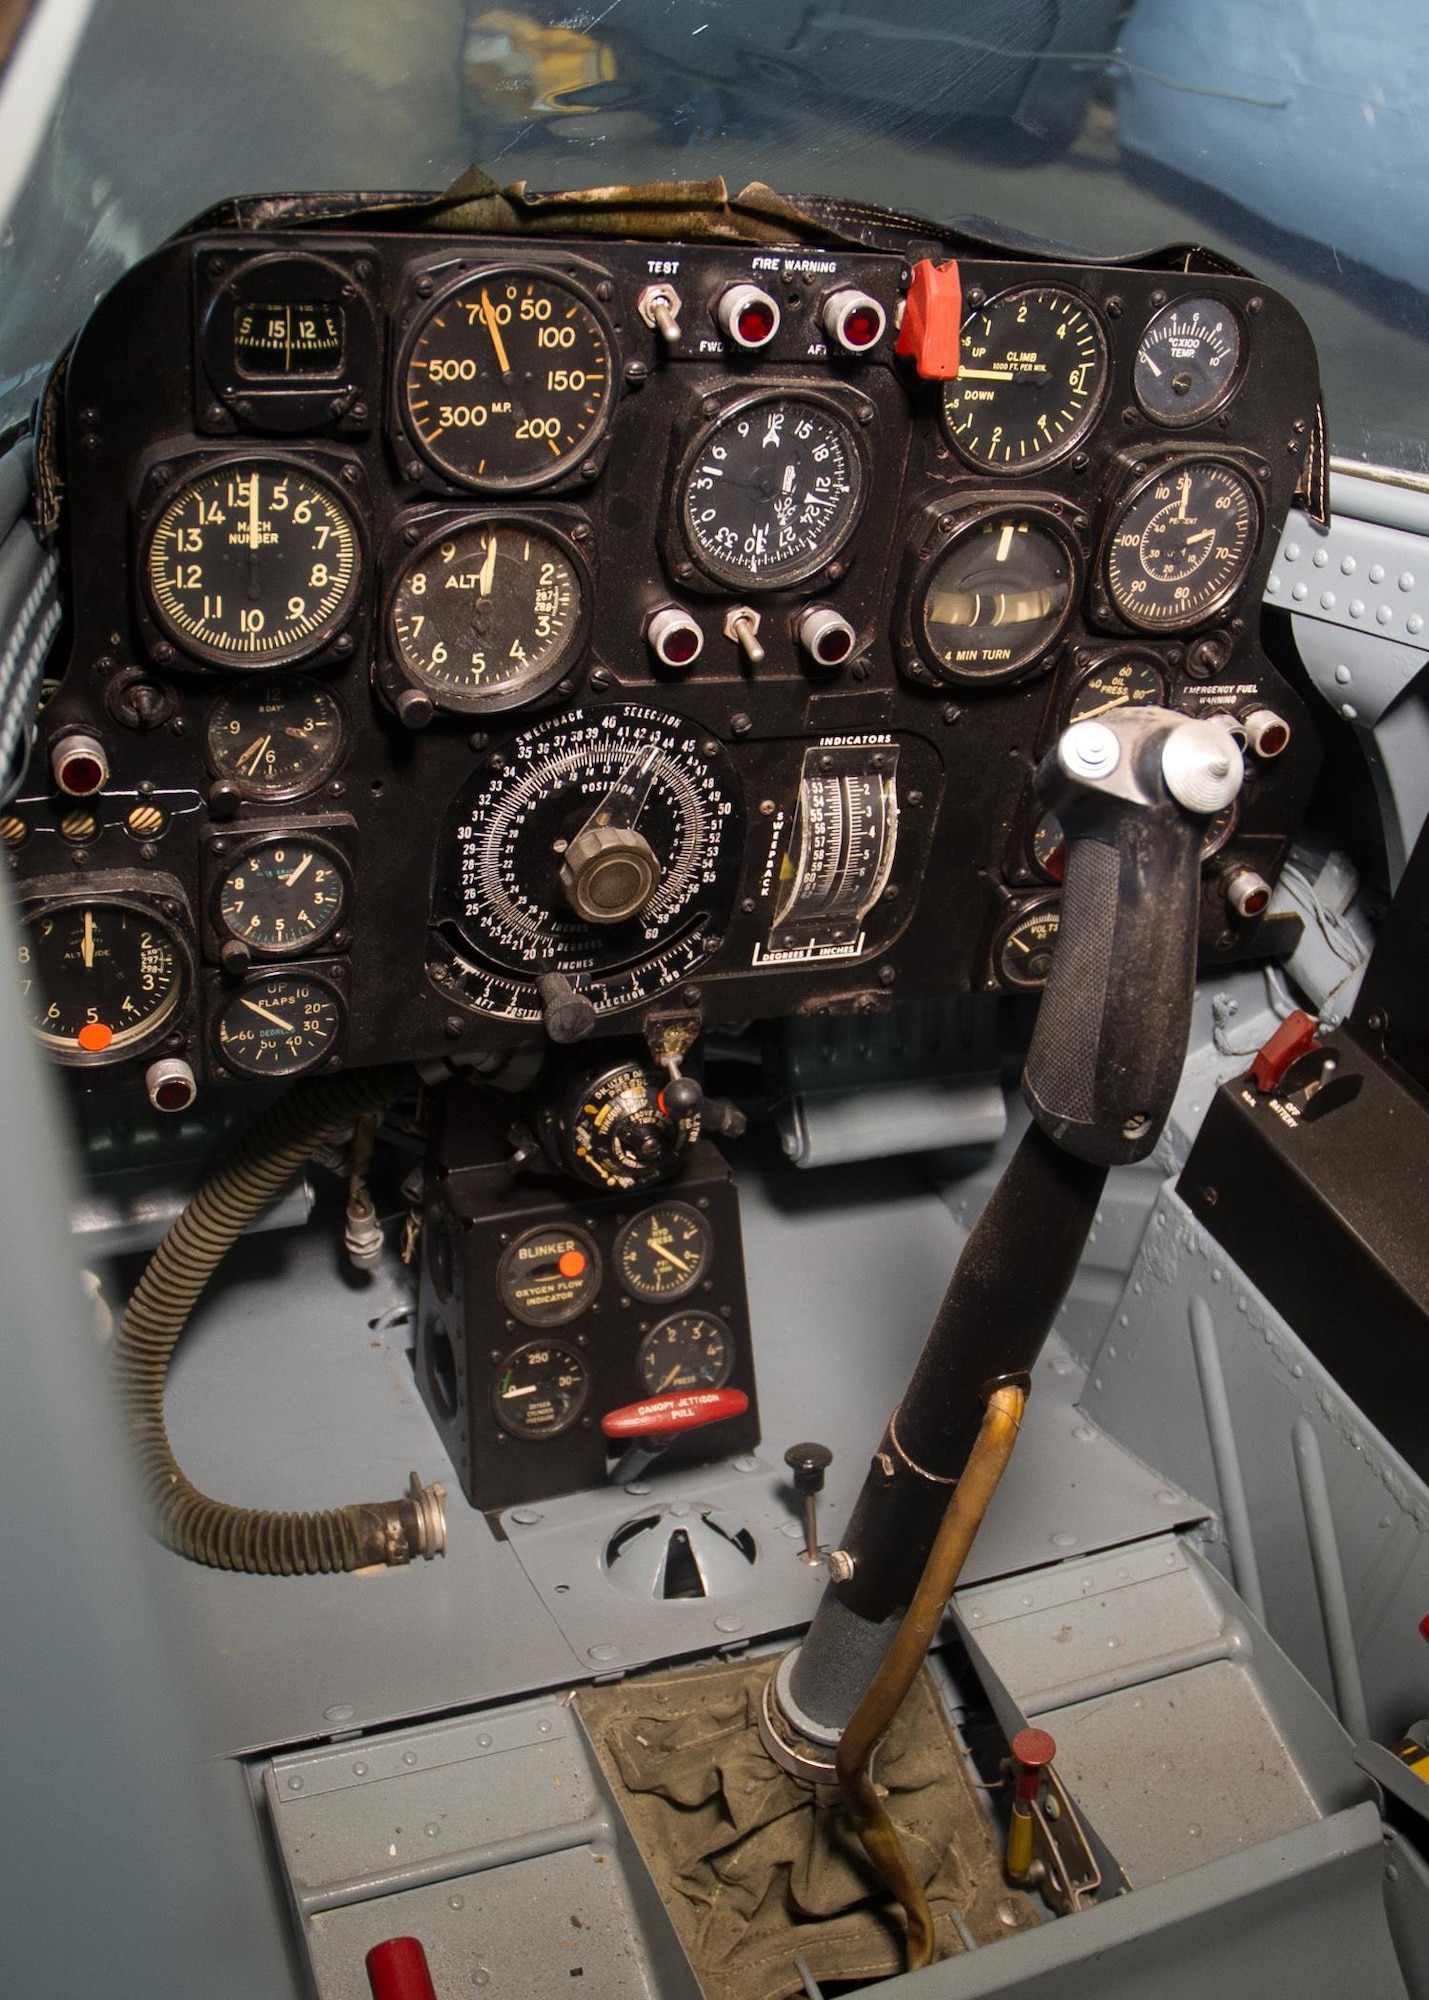 Bell X-5 cockpit in the Research & Development Gallery at the National Museum of the United States Air Force. (U.S. Air Force photo by Ken LaRock)